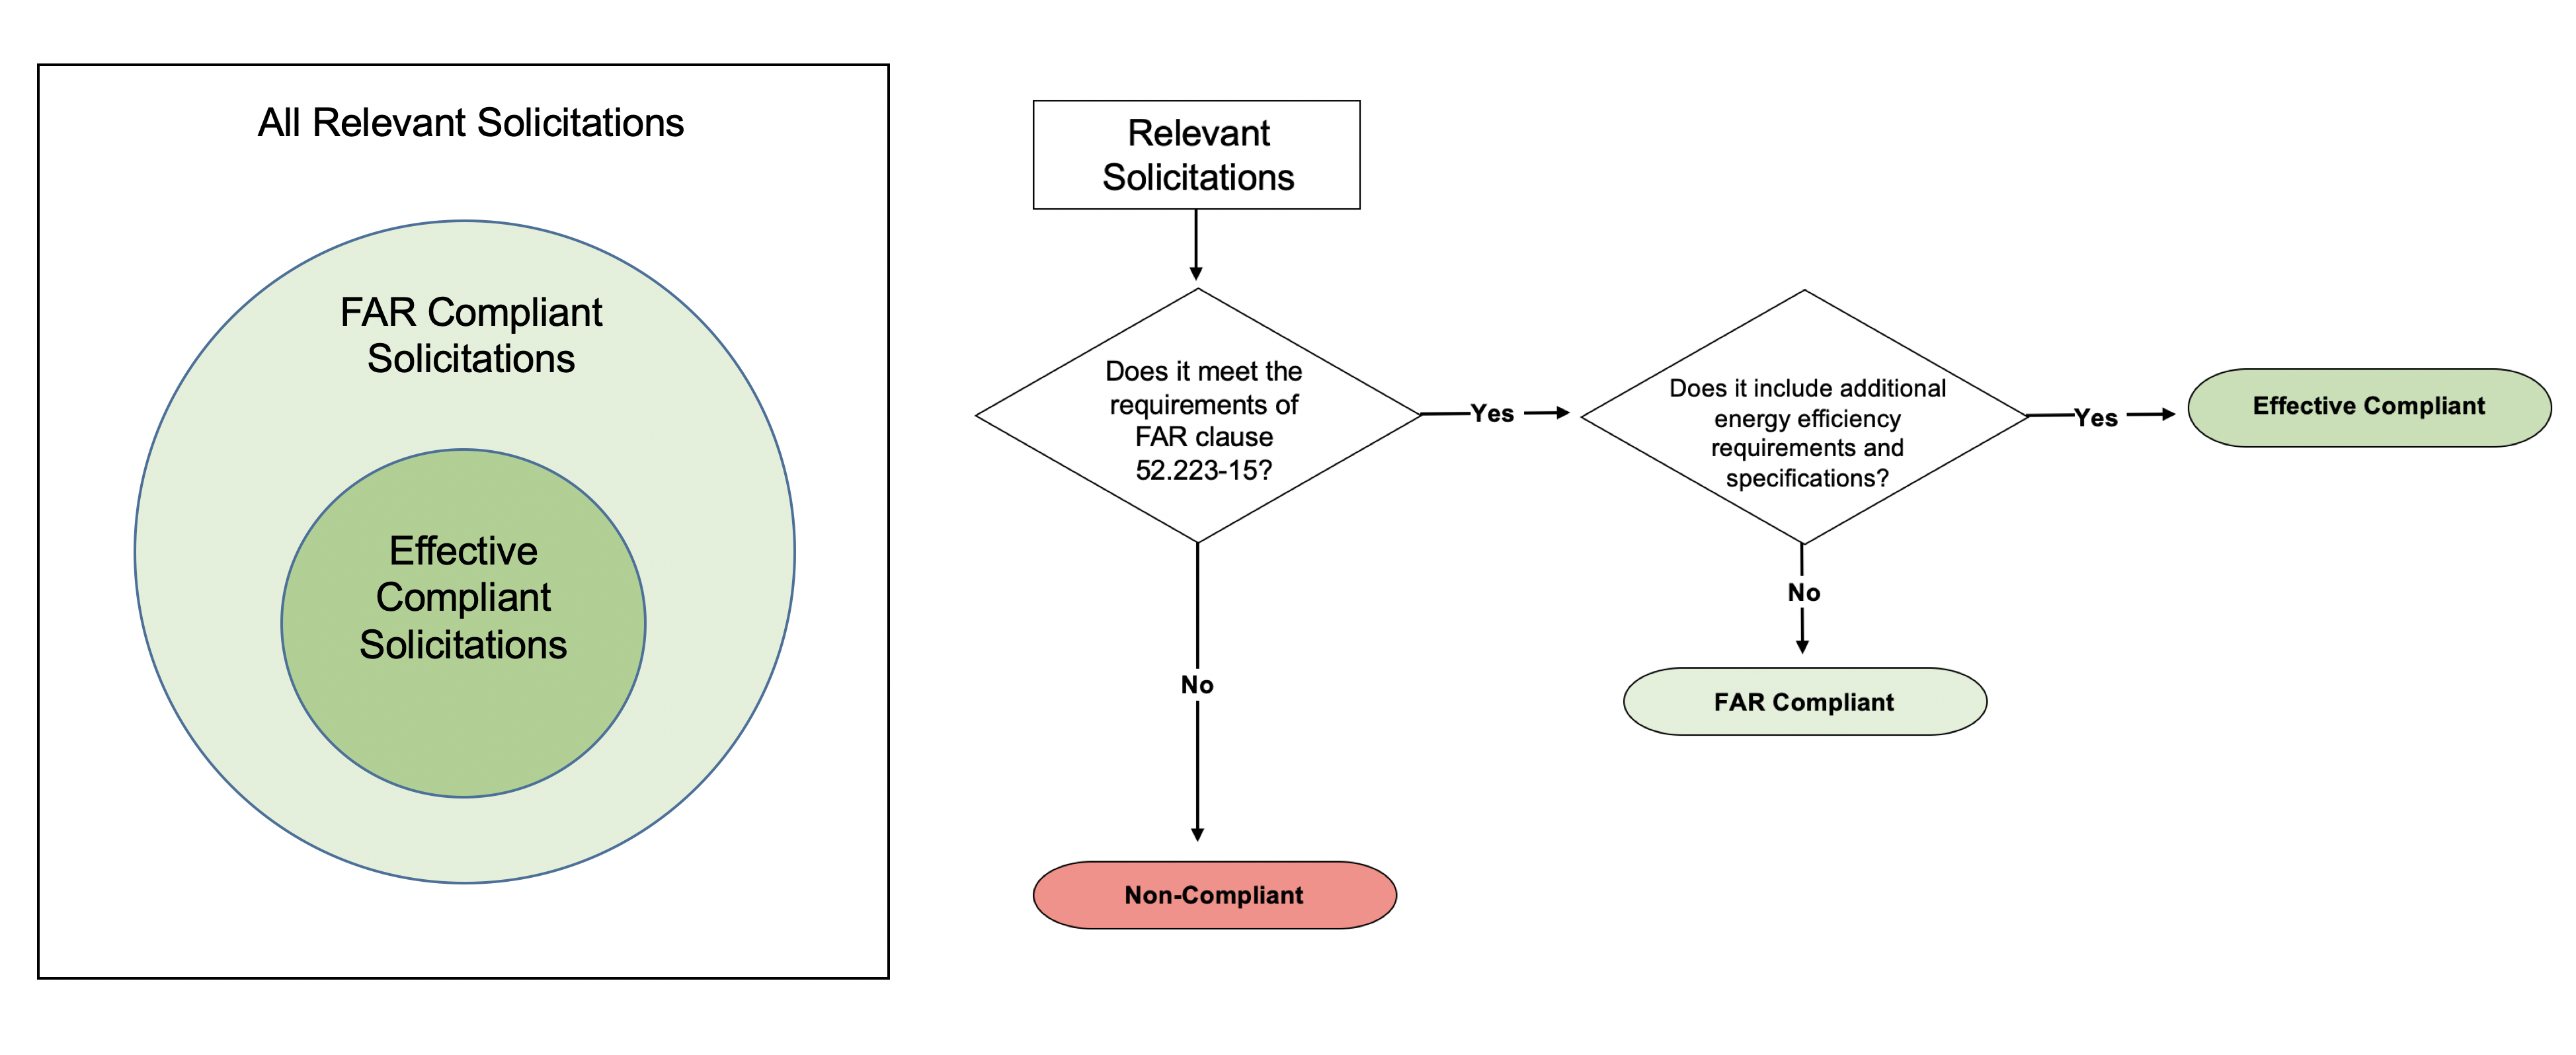 This image shows that effective compliant solicitations are a subset of FAR compliant solicitations on the left side. On the right side, there is a decision tree showing that when a solicitation does not meet the requirements of FAR clause 52.223-15, the solicitation is non-compliant. When it does meet the FAR clause requirements it is considered a compliant solicitation. Compliant solicitations that do not include additional energy efficiency specifications or language are considered FAR compliant, while those that do include additional energy efficiency specifications or language are considered effective compliant.